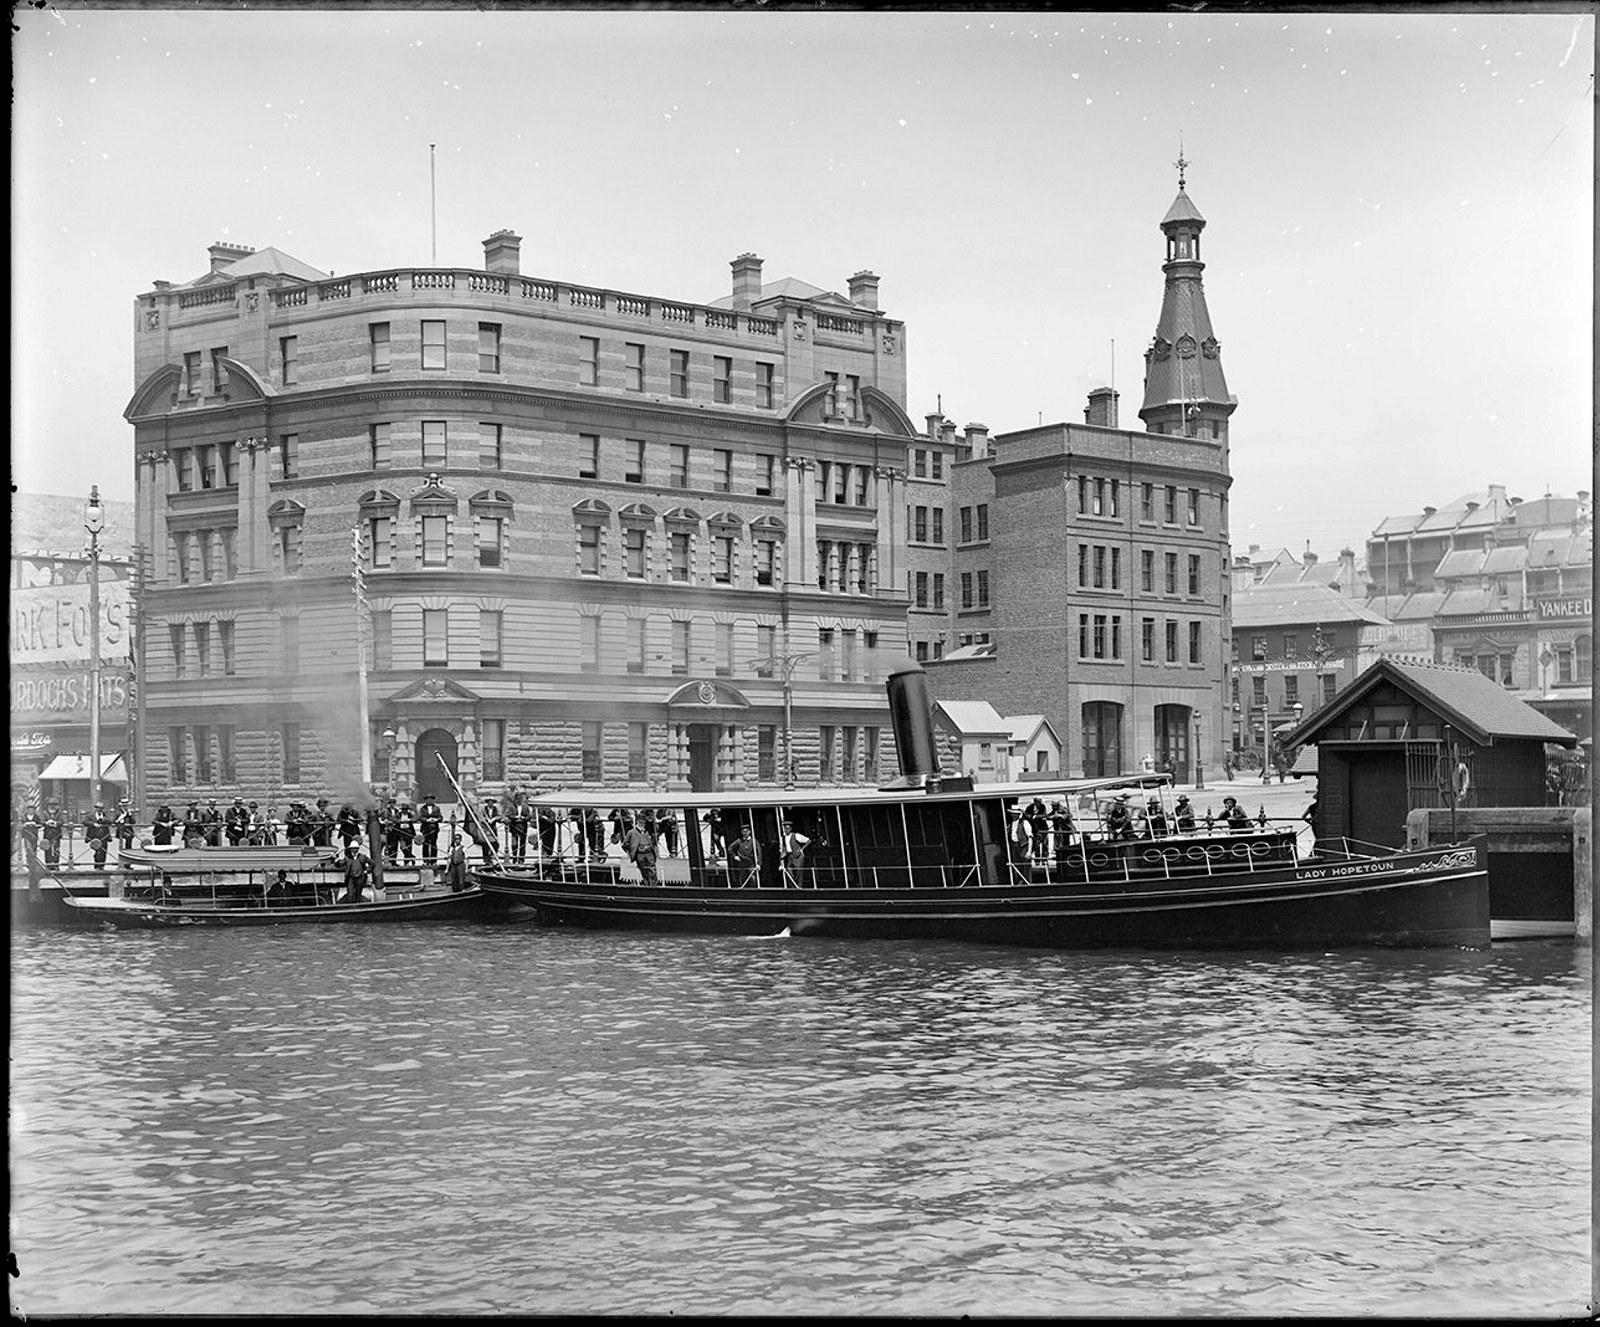 'Lady Hopetoun' docked at Commissioners Steps in front of the Sydney Harbour Trust building